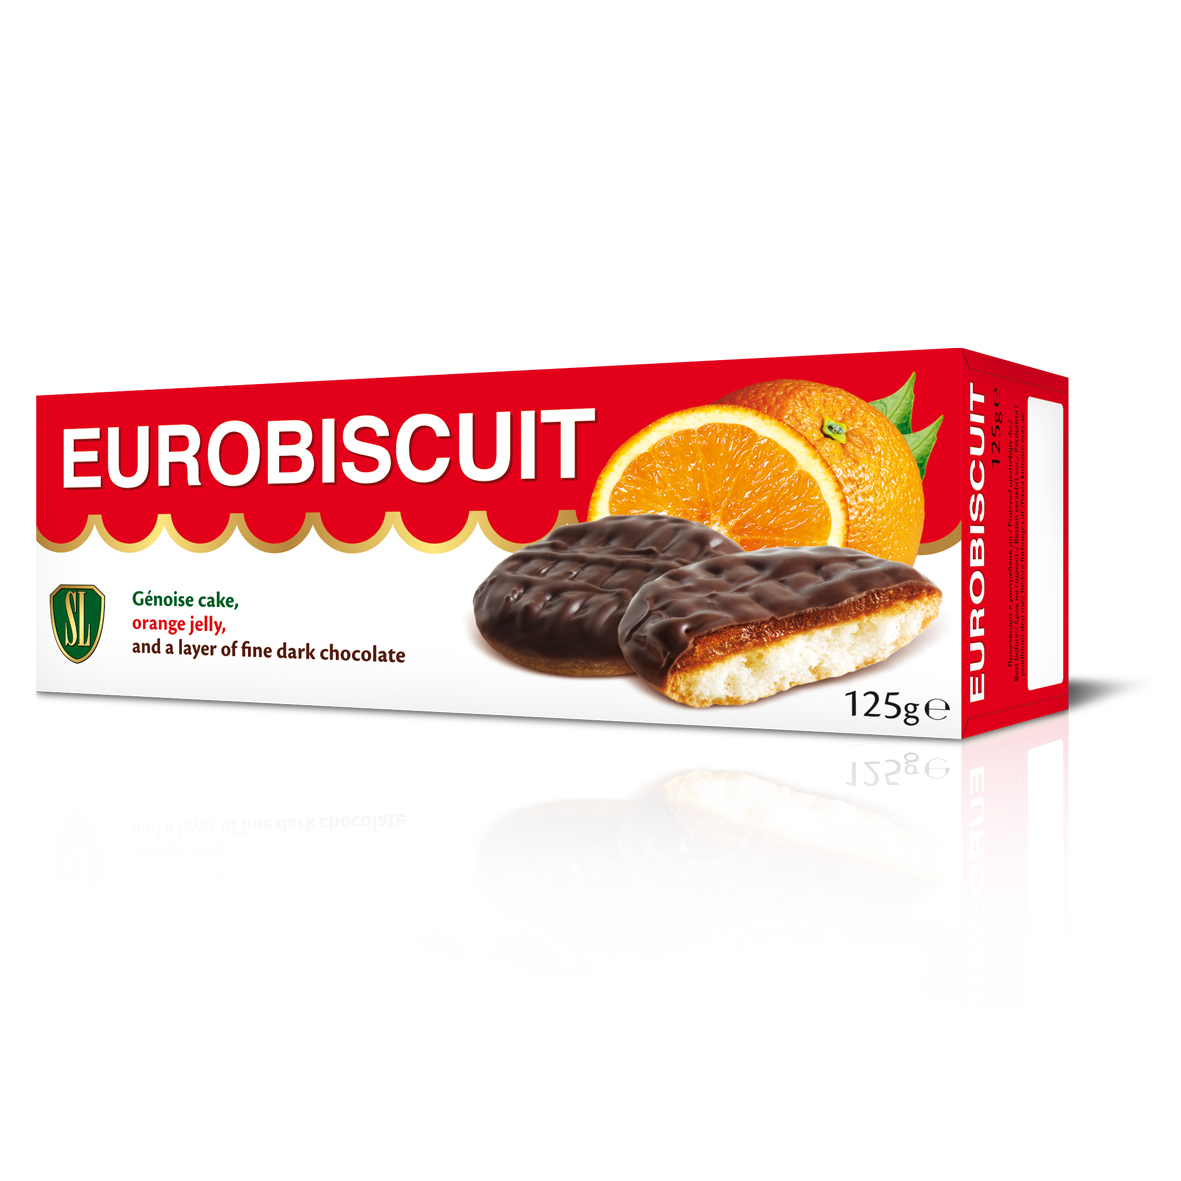 EUROBISCUIT - Biscuit with orange jelly